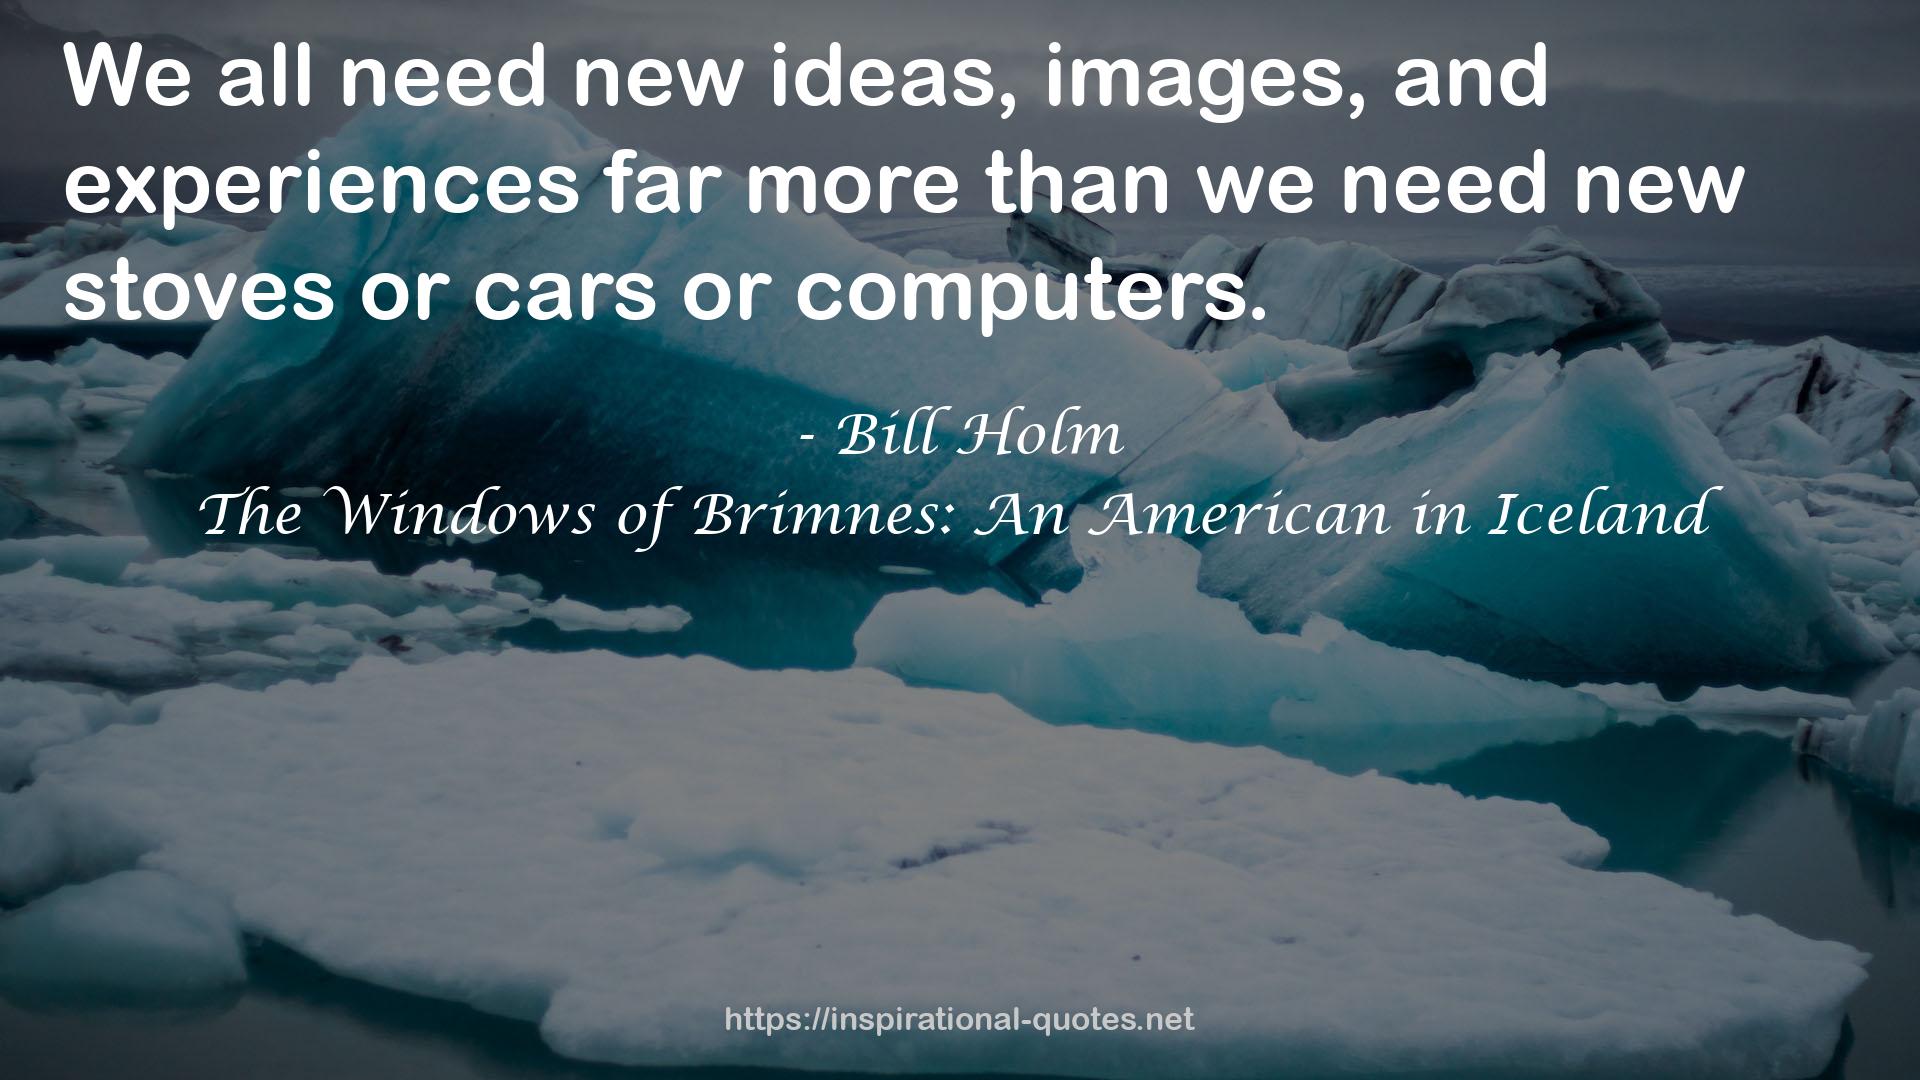 The Windows of Brimnes: An American in Iceland QUOTES